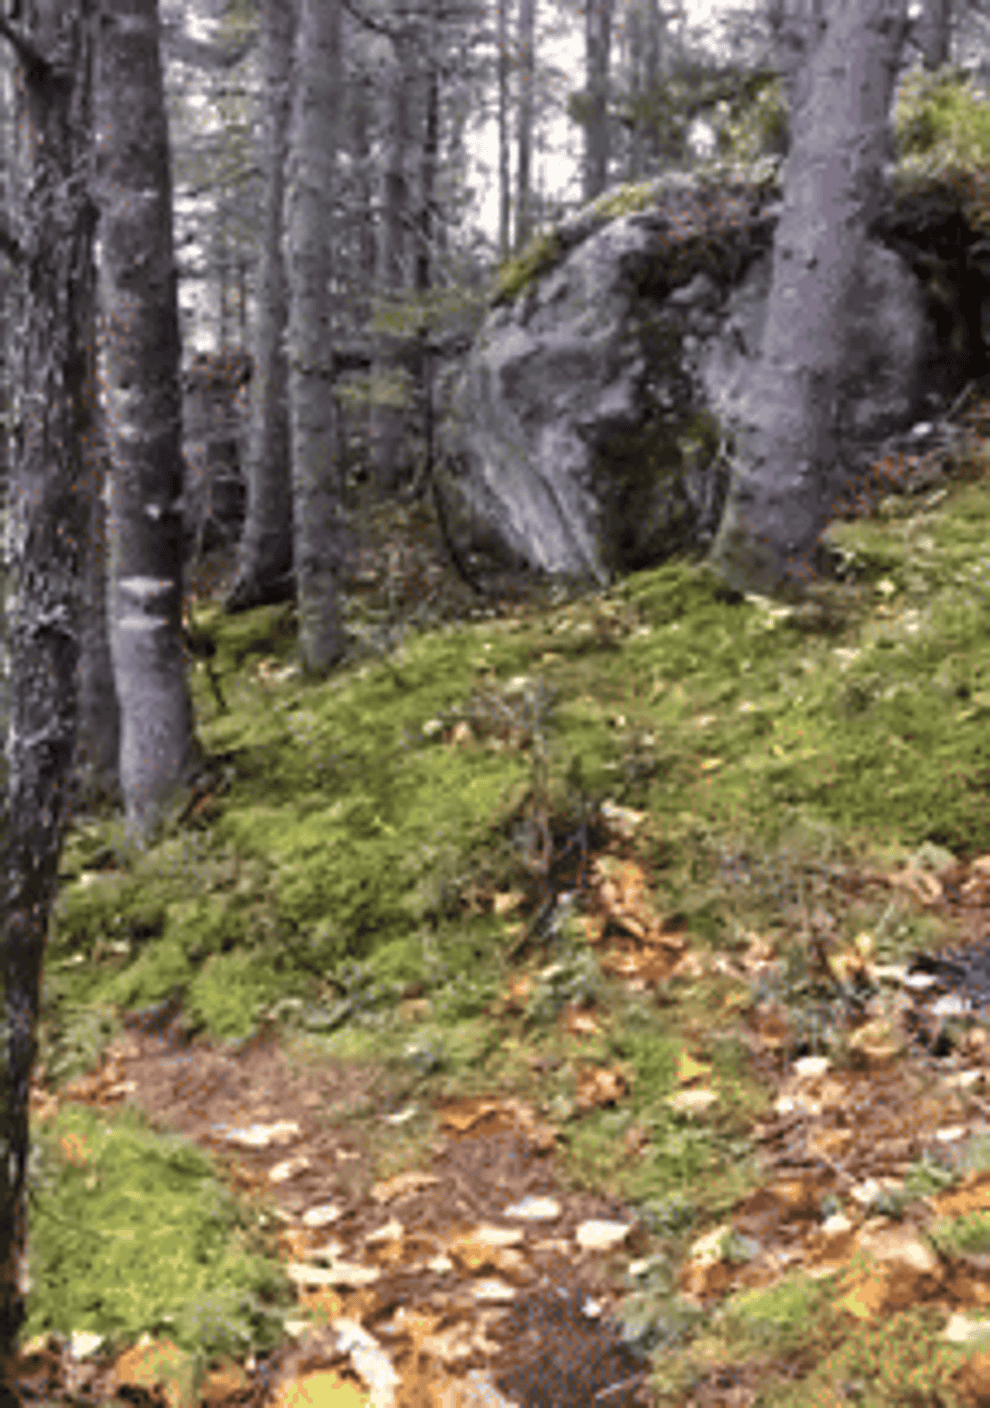 a forest floor moves up and down like it is breathing